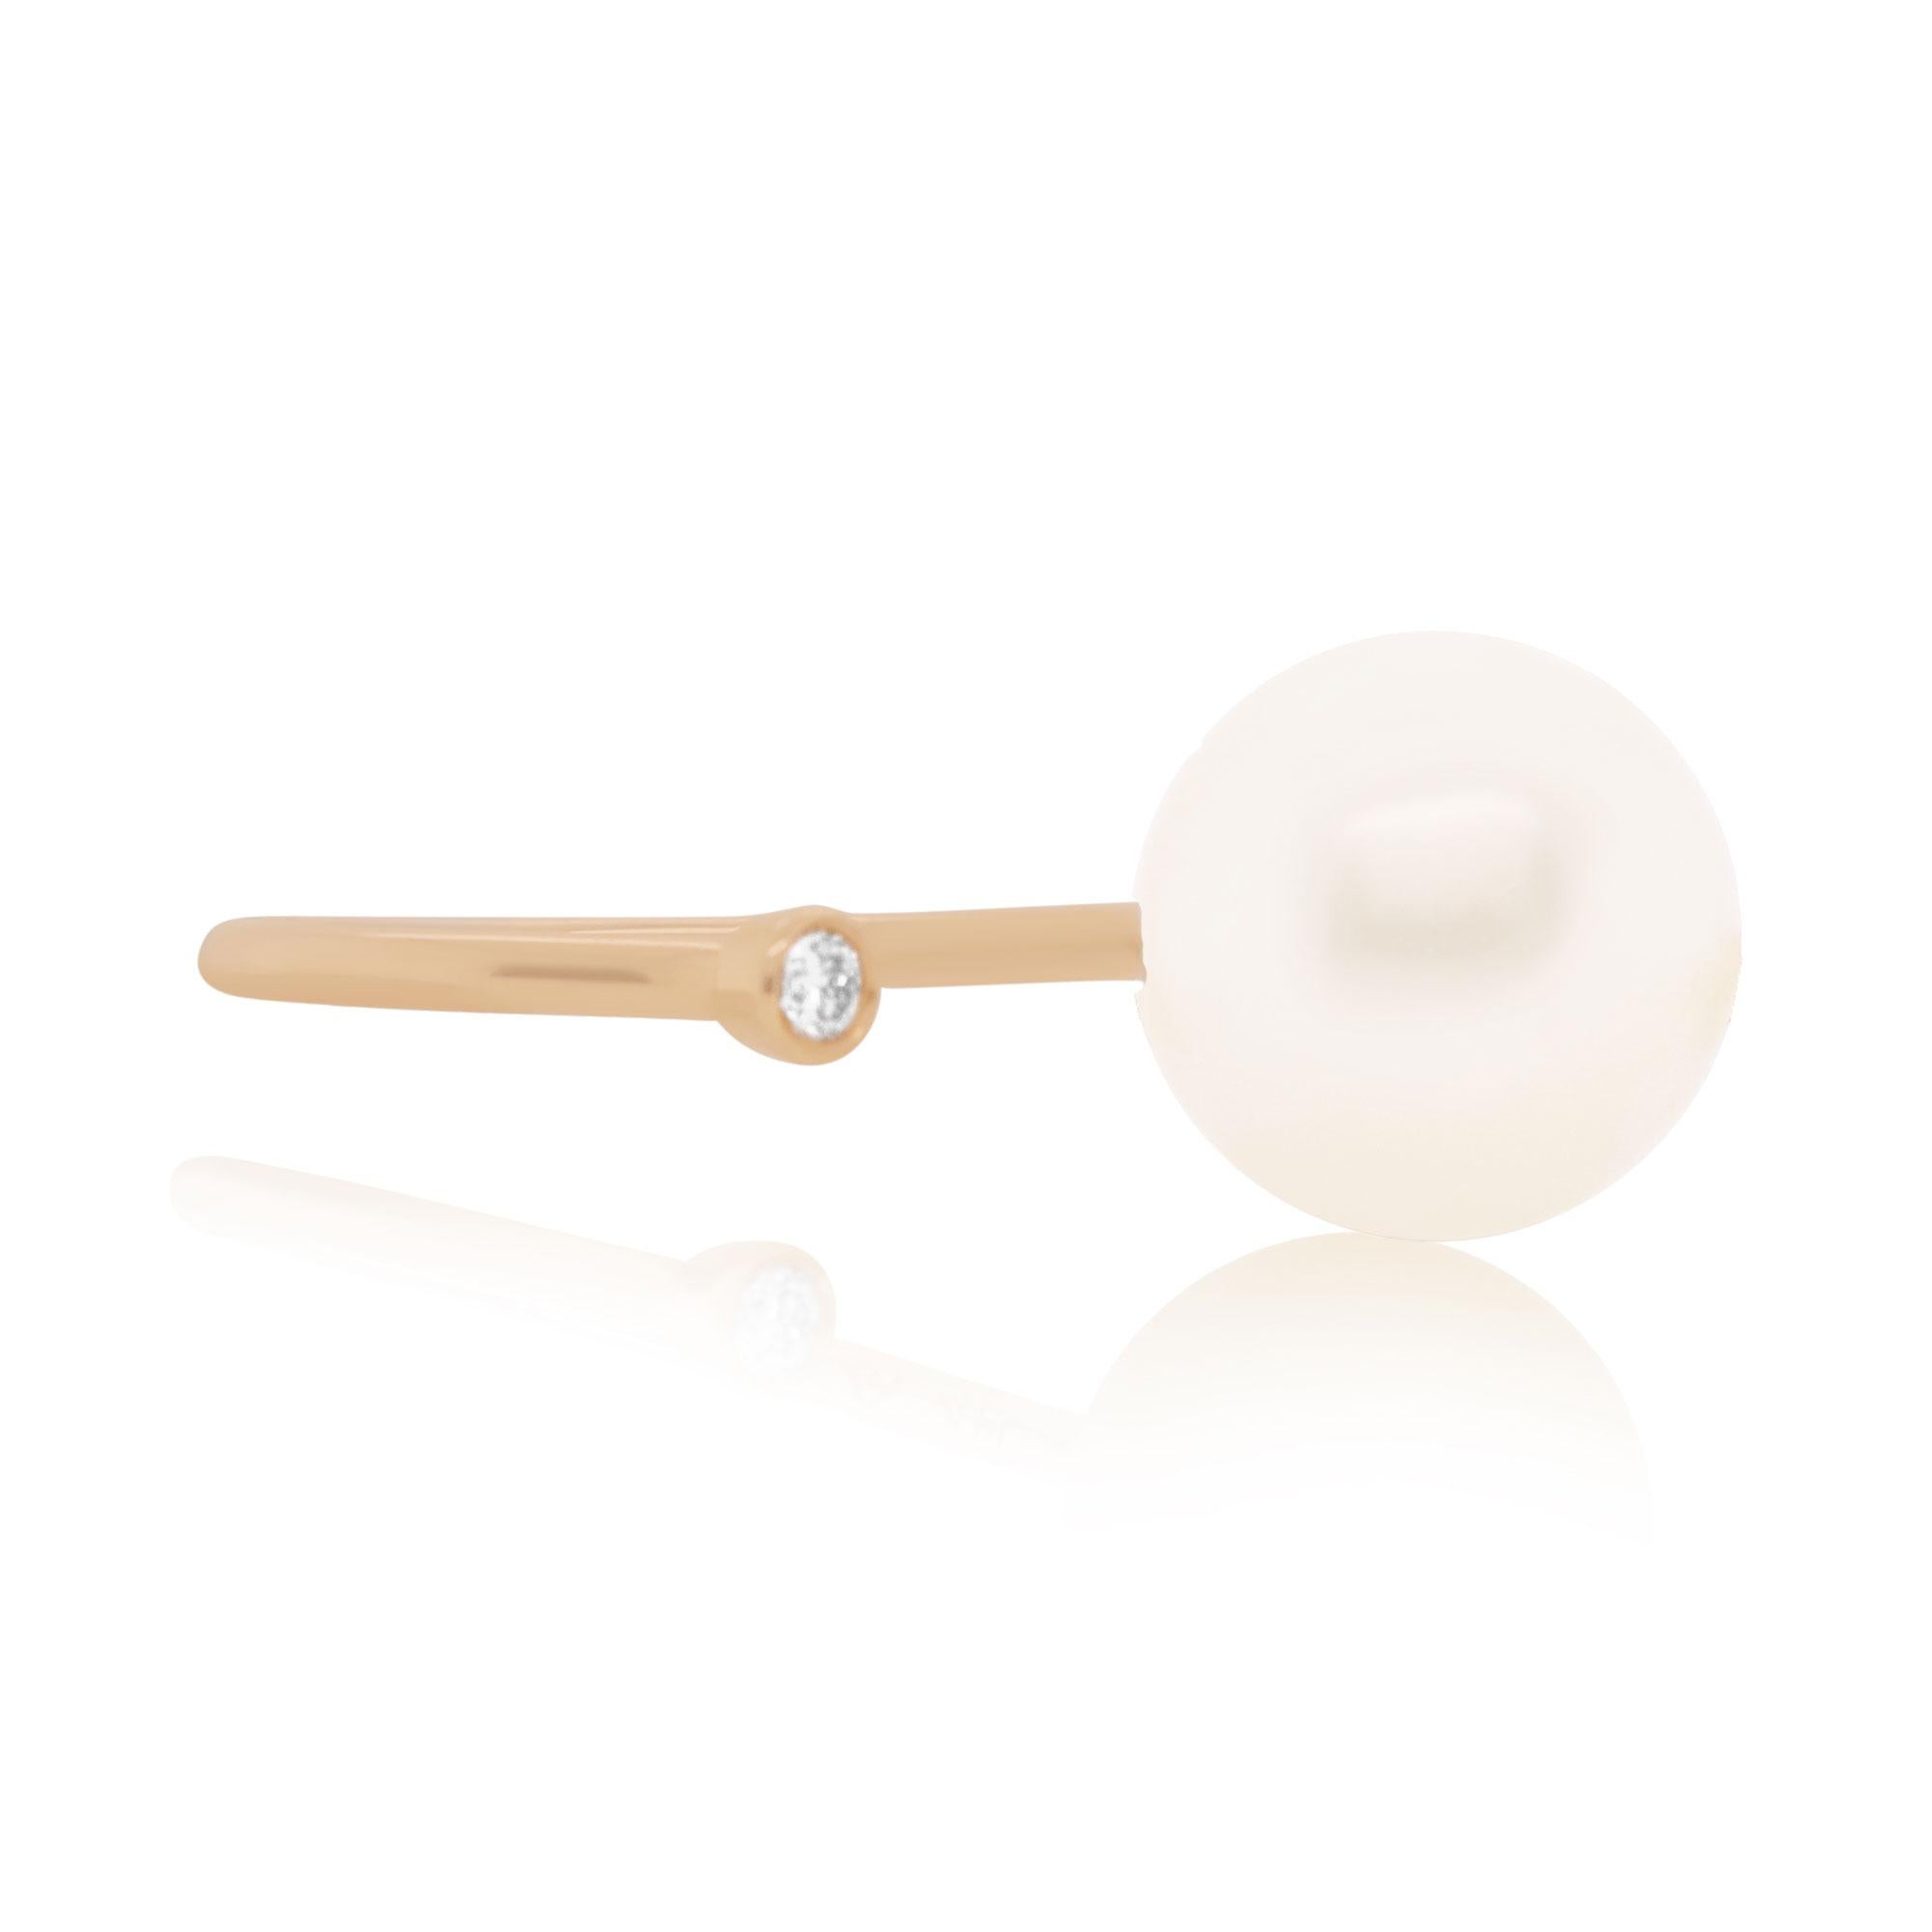 Material: 14k Yellow Gold 
Center Stone Details: 1 Round South Sea Pearl at 2.13 Carats 
Diamond Details: 1 Brilliant Round White Diamond at 0.04 Carats. Clarity: SI. Color: H-I
Alberto offers complimentary sizing on all rings.

Fine one-of-a-kind